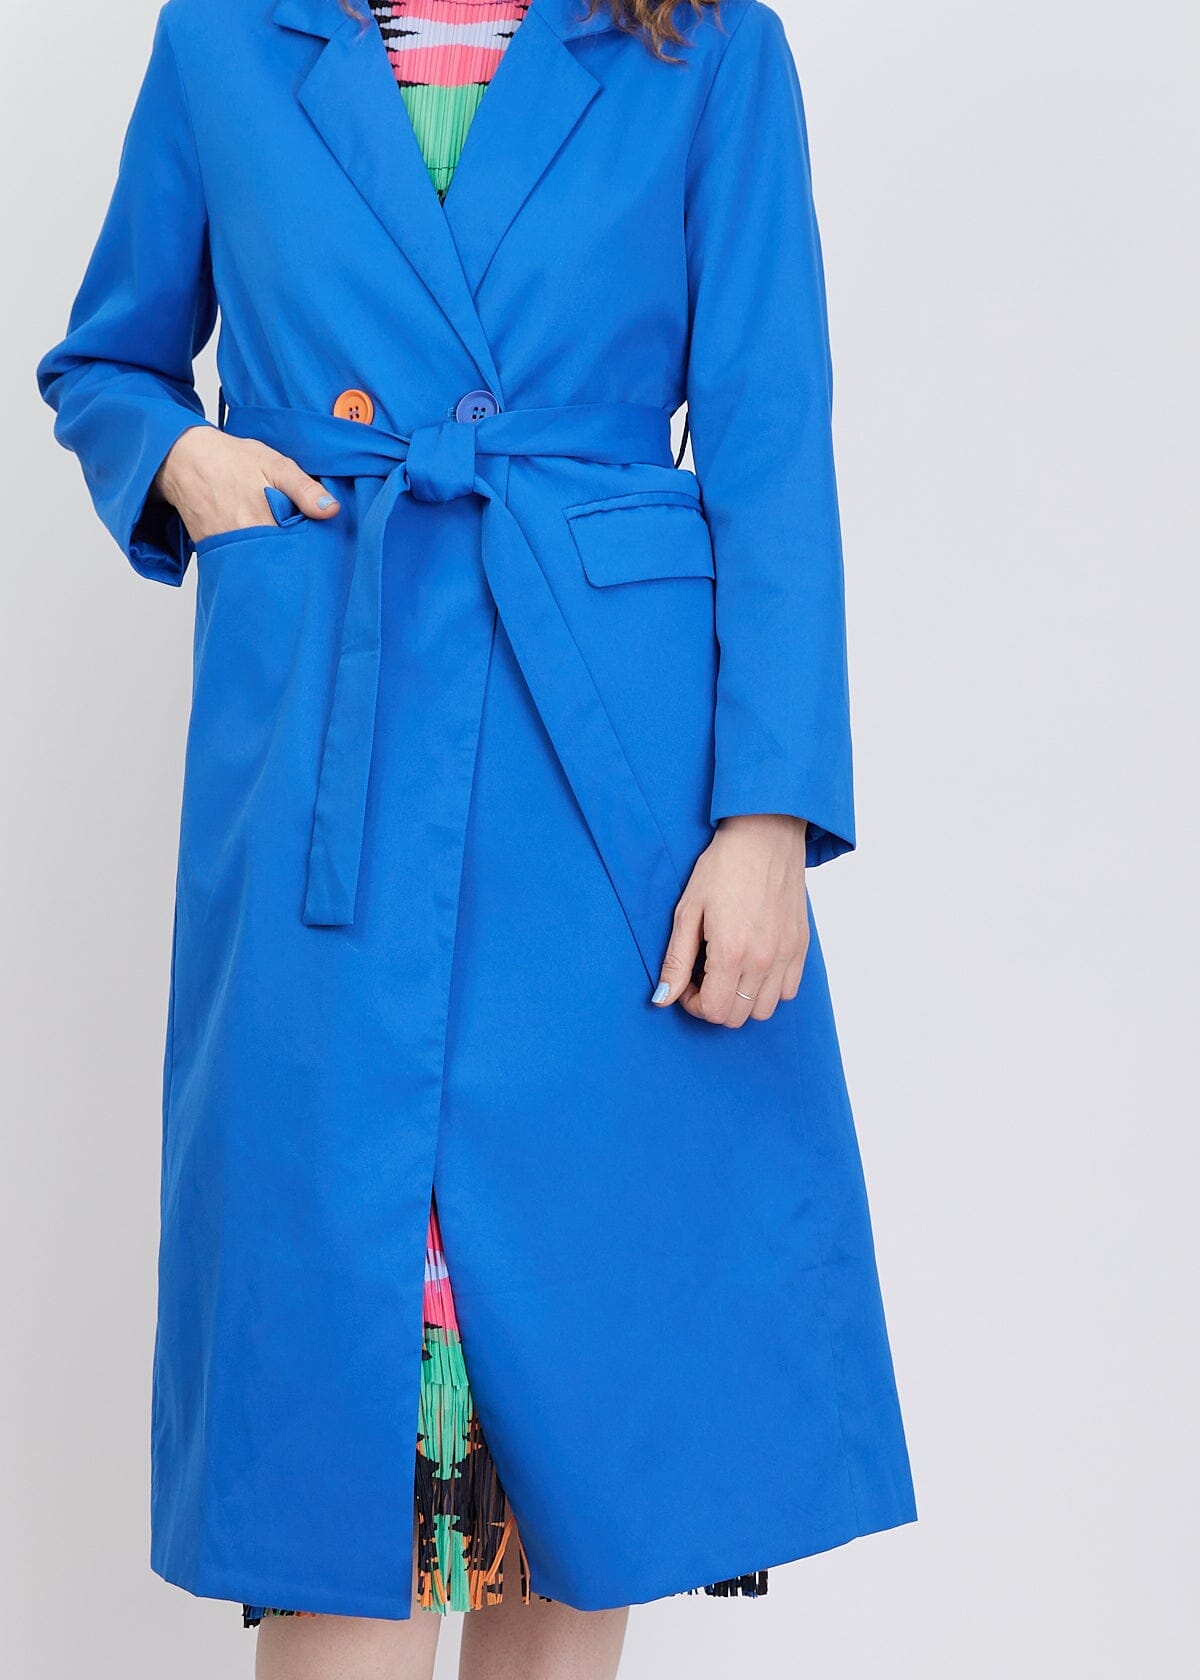 Statement Trench Outerwear Kate Hewko 